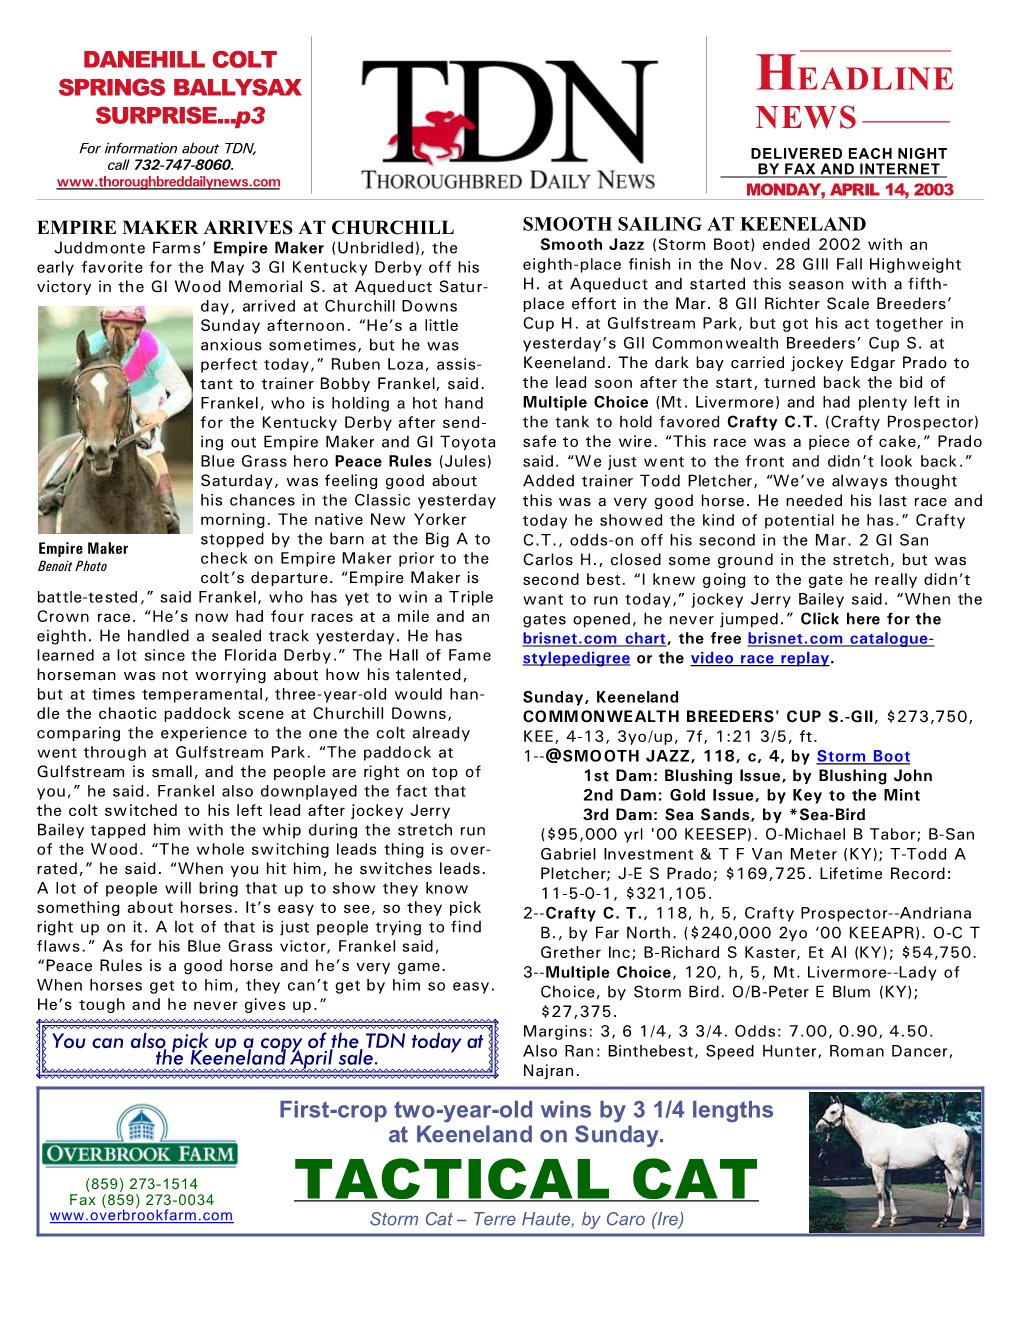 TACTICAL CAT Fax (859) 273-0034 Storm Cat S Terre Haute, by Caro (Ire) TDN P HEADLINE NEWS • 4/14/03 • PAGE 2 of 4